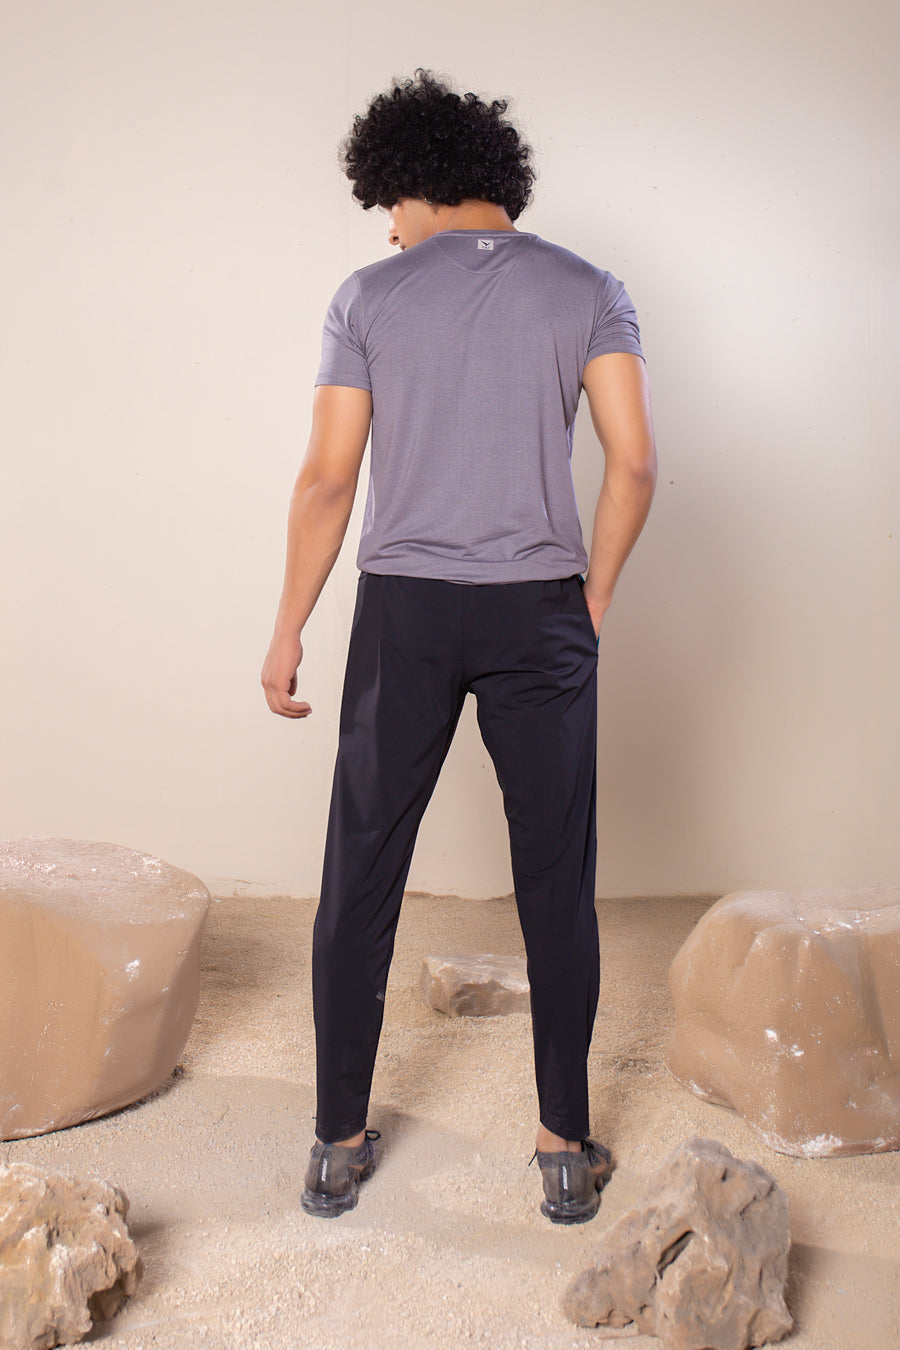 Men's Wanderlust Pant Black 2.0 | VOLO Apparel | These pants are designed to give you wanderlust, an ultralight super durable athletic pant with a five pocket design, a 3 point gusset for all your movements and a high ankle tapered bottom. The revolutional Italian nylon is patented with UPF 50 protection and extreme breathability. The one pant to go everywhere and do everything!